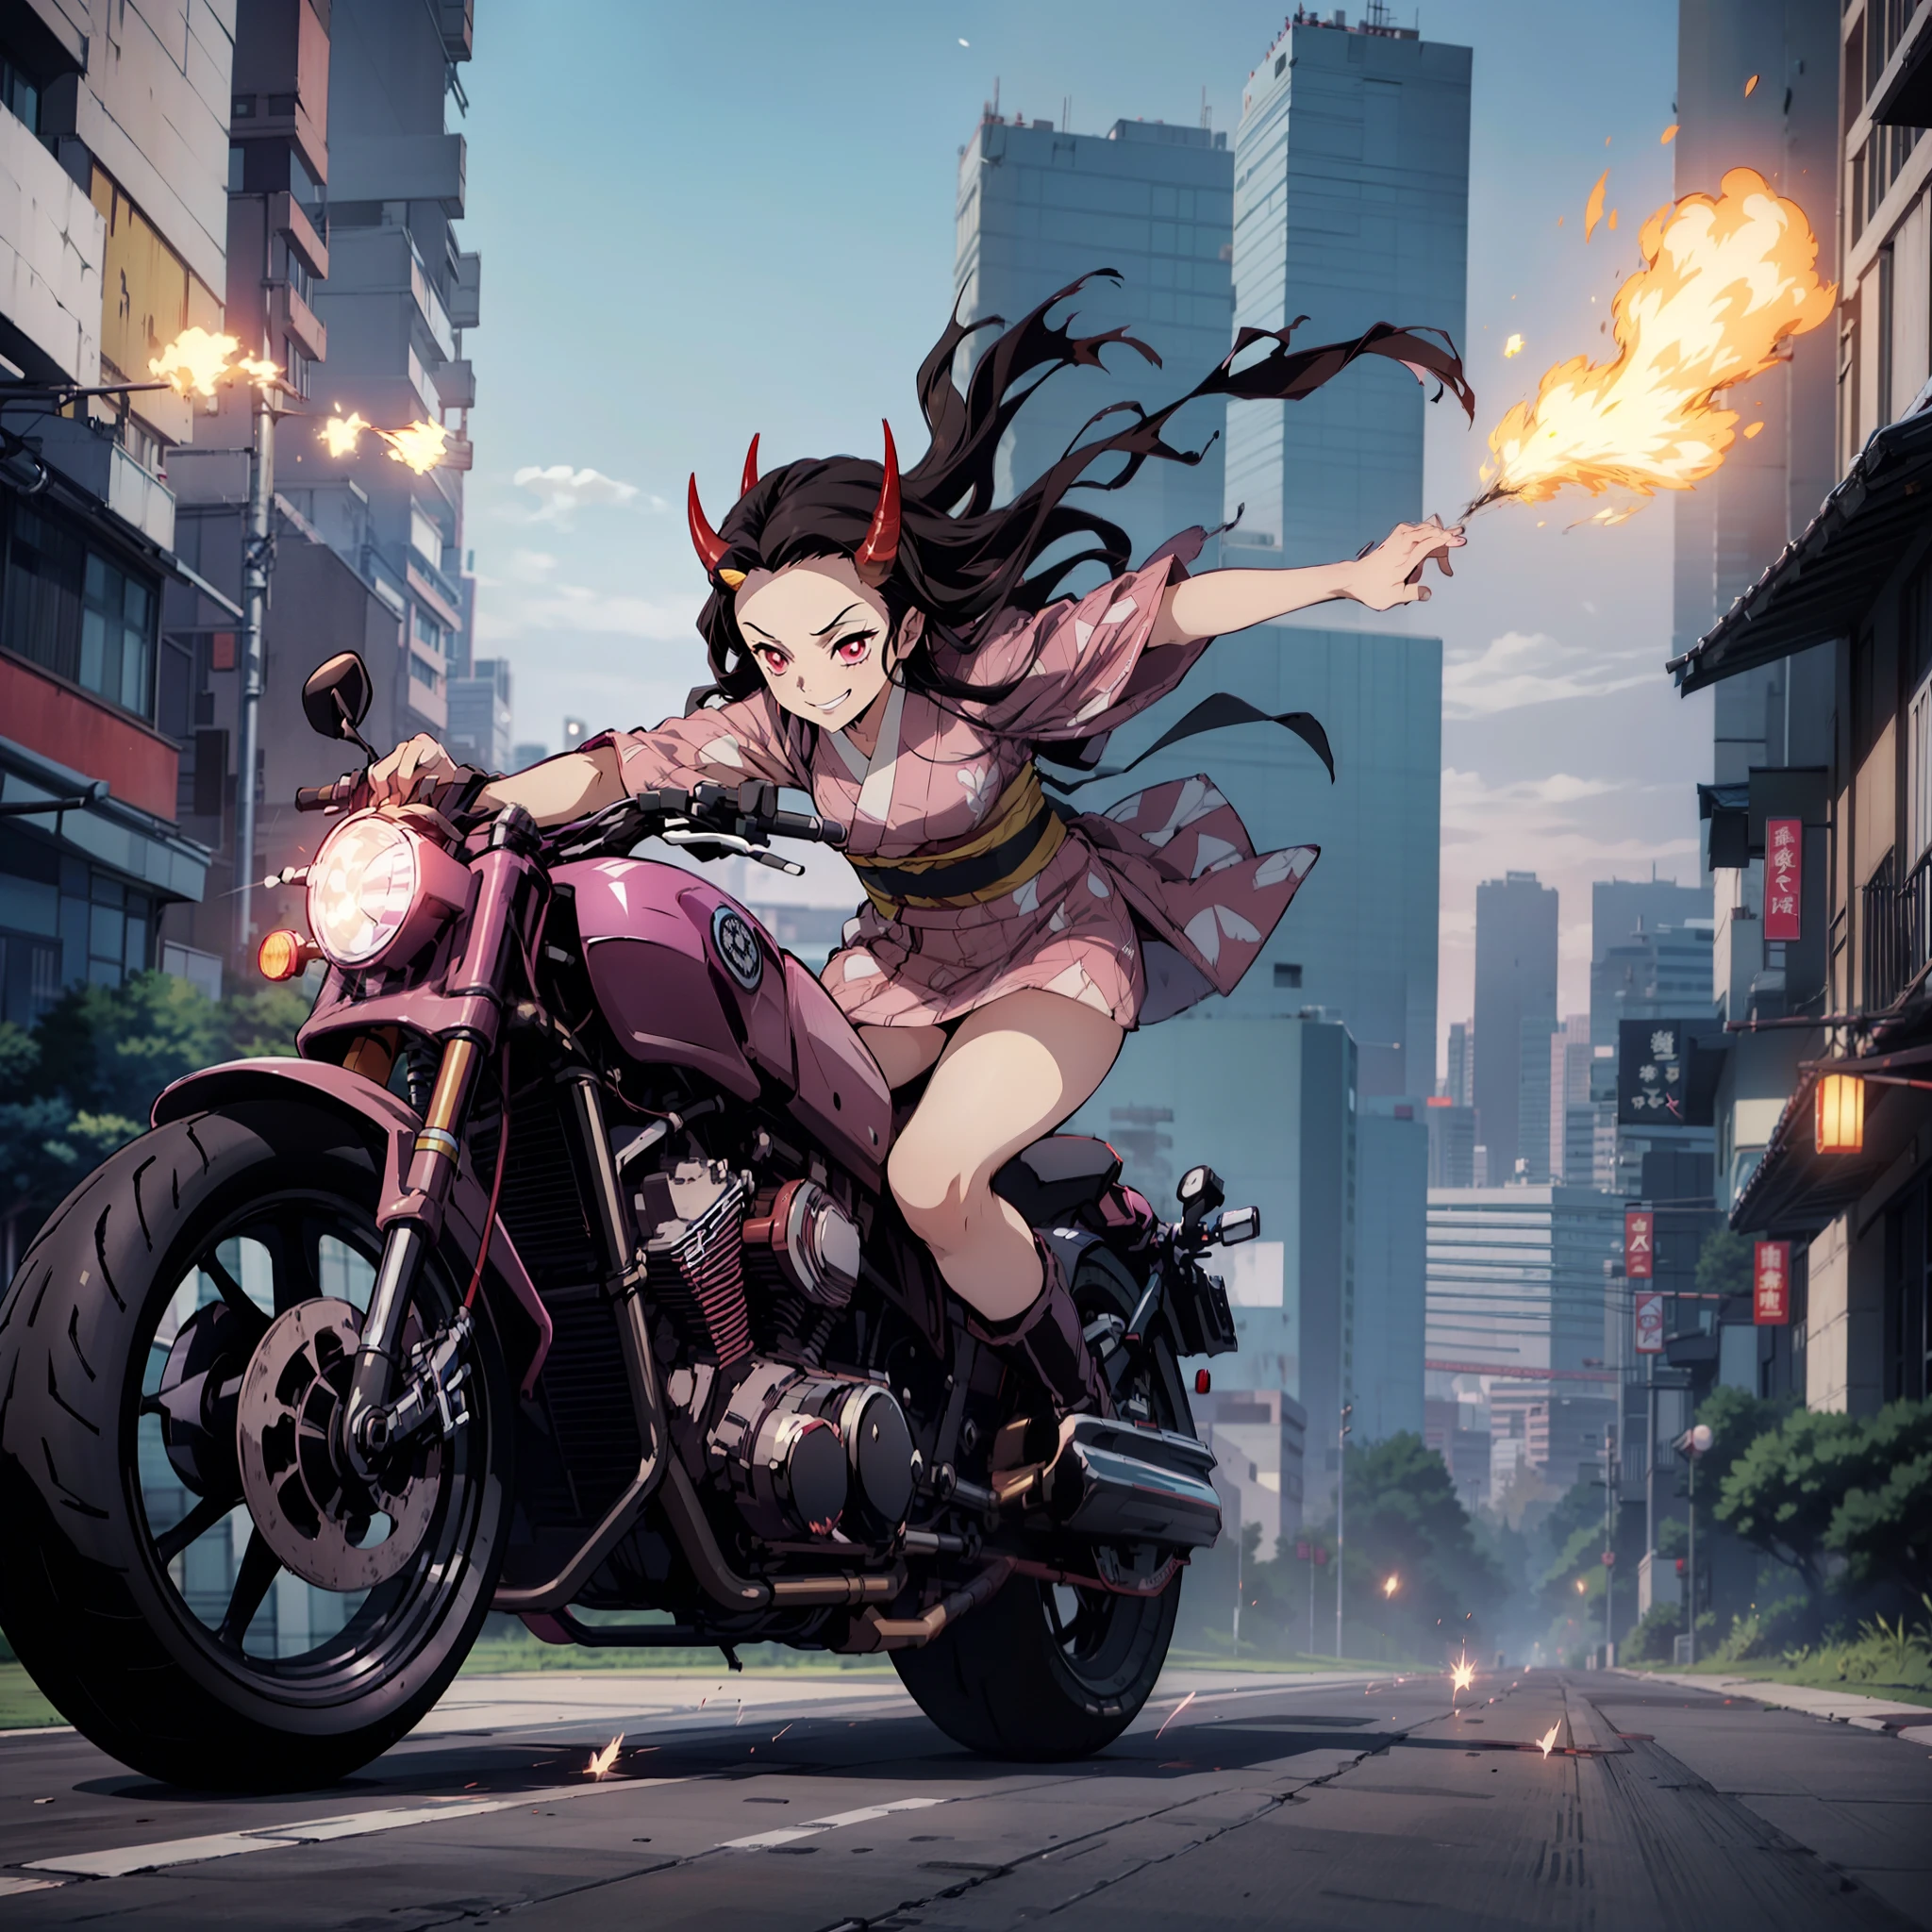 (masutepiece, Best Quality:1.2), kimetsu no yaiba style, Kamado Nezuko, (1girl in, Solo), 20yr old, Full body, (Black and pink kimono), (bare legs, short boots), (red demon horns, Red Eyes), Evil smile, BREAK (driving motorcycle on the city with high speed, keep wheelie, yhmotorbike), (slow motion:1.3), (Motion Blur:1.3), (SPEEDLINE:1.4), Sense of speed, Sparks and smoke coming out of tires